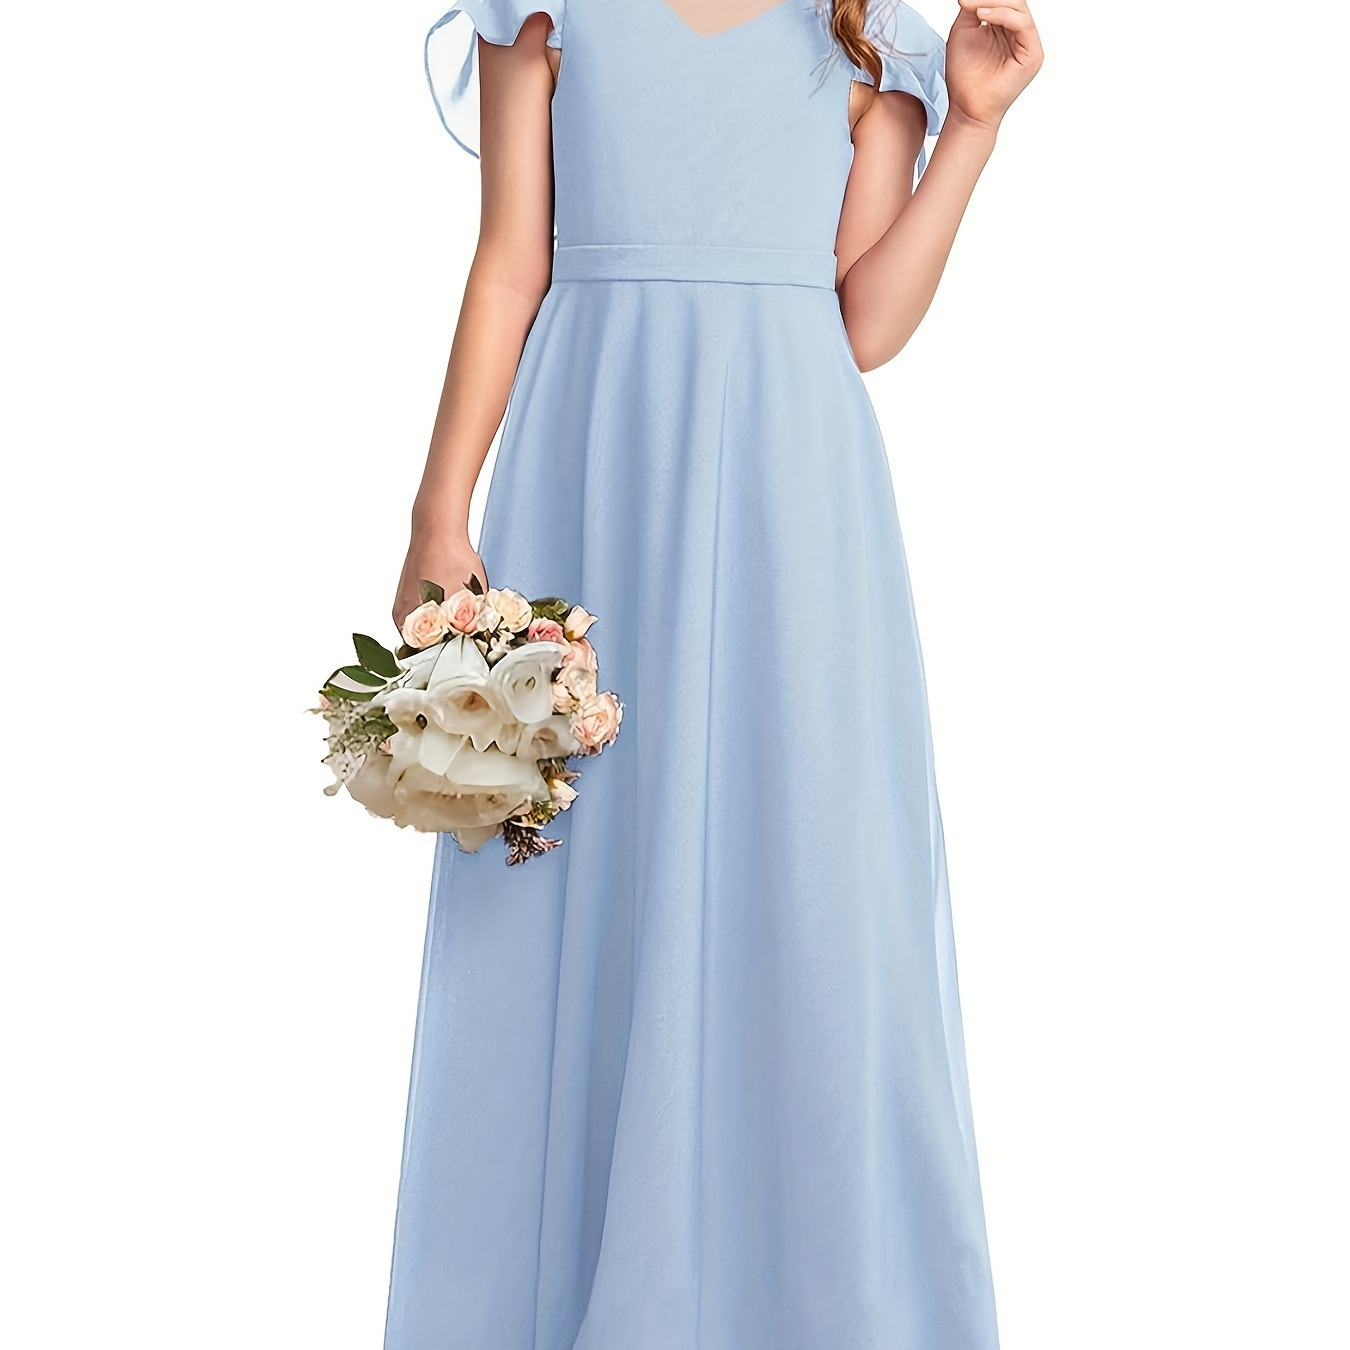 

Kids Junior Bridesmaid Dresses Chiffon Flower Girl Dress For Teen Girl Long Party Pageant Gowns